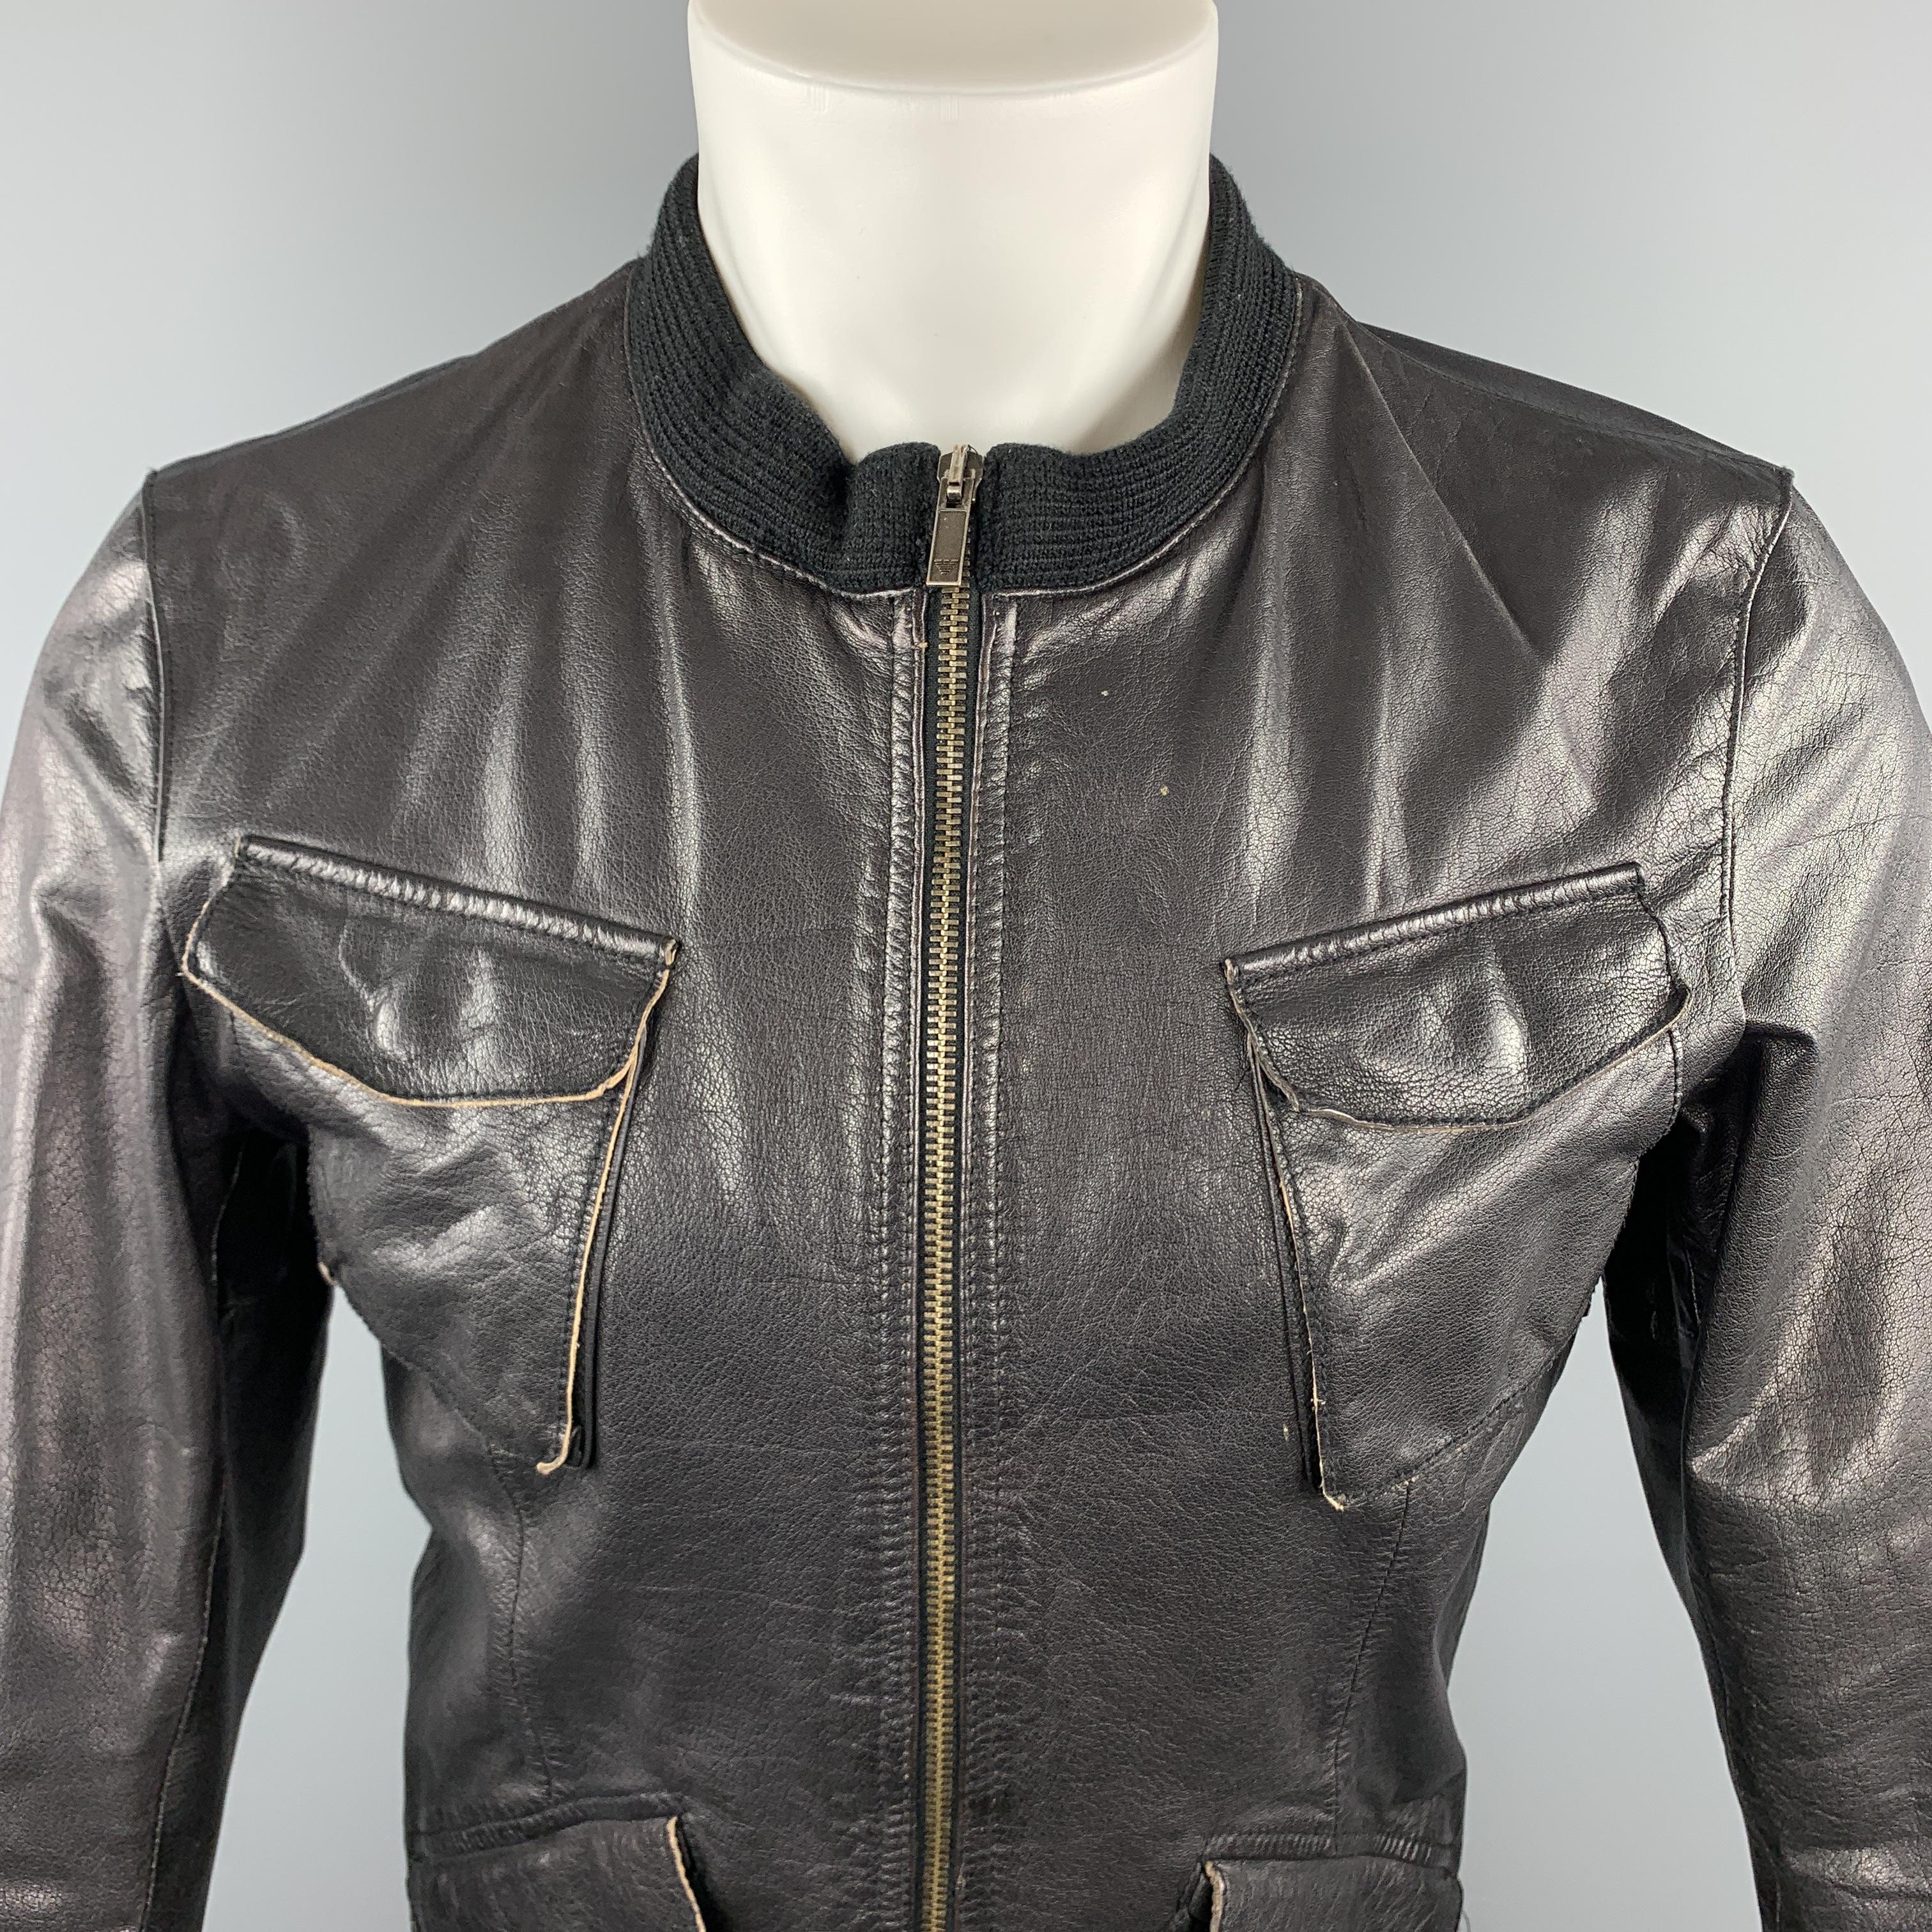 EMPORIO ARMANI jacket comes in a black leather material, with a ribbed collar, zip at closure, patch and flap pockets, snaps at cuffs, featuring a distressed effect. 

Excellent Pre-Owned Condition.
Marked: US 38

Measurements:

Shoulder: 17